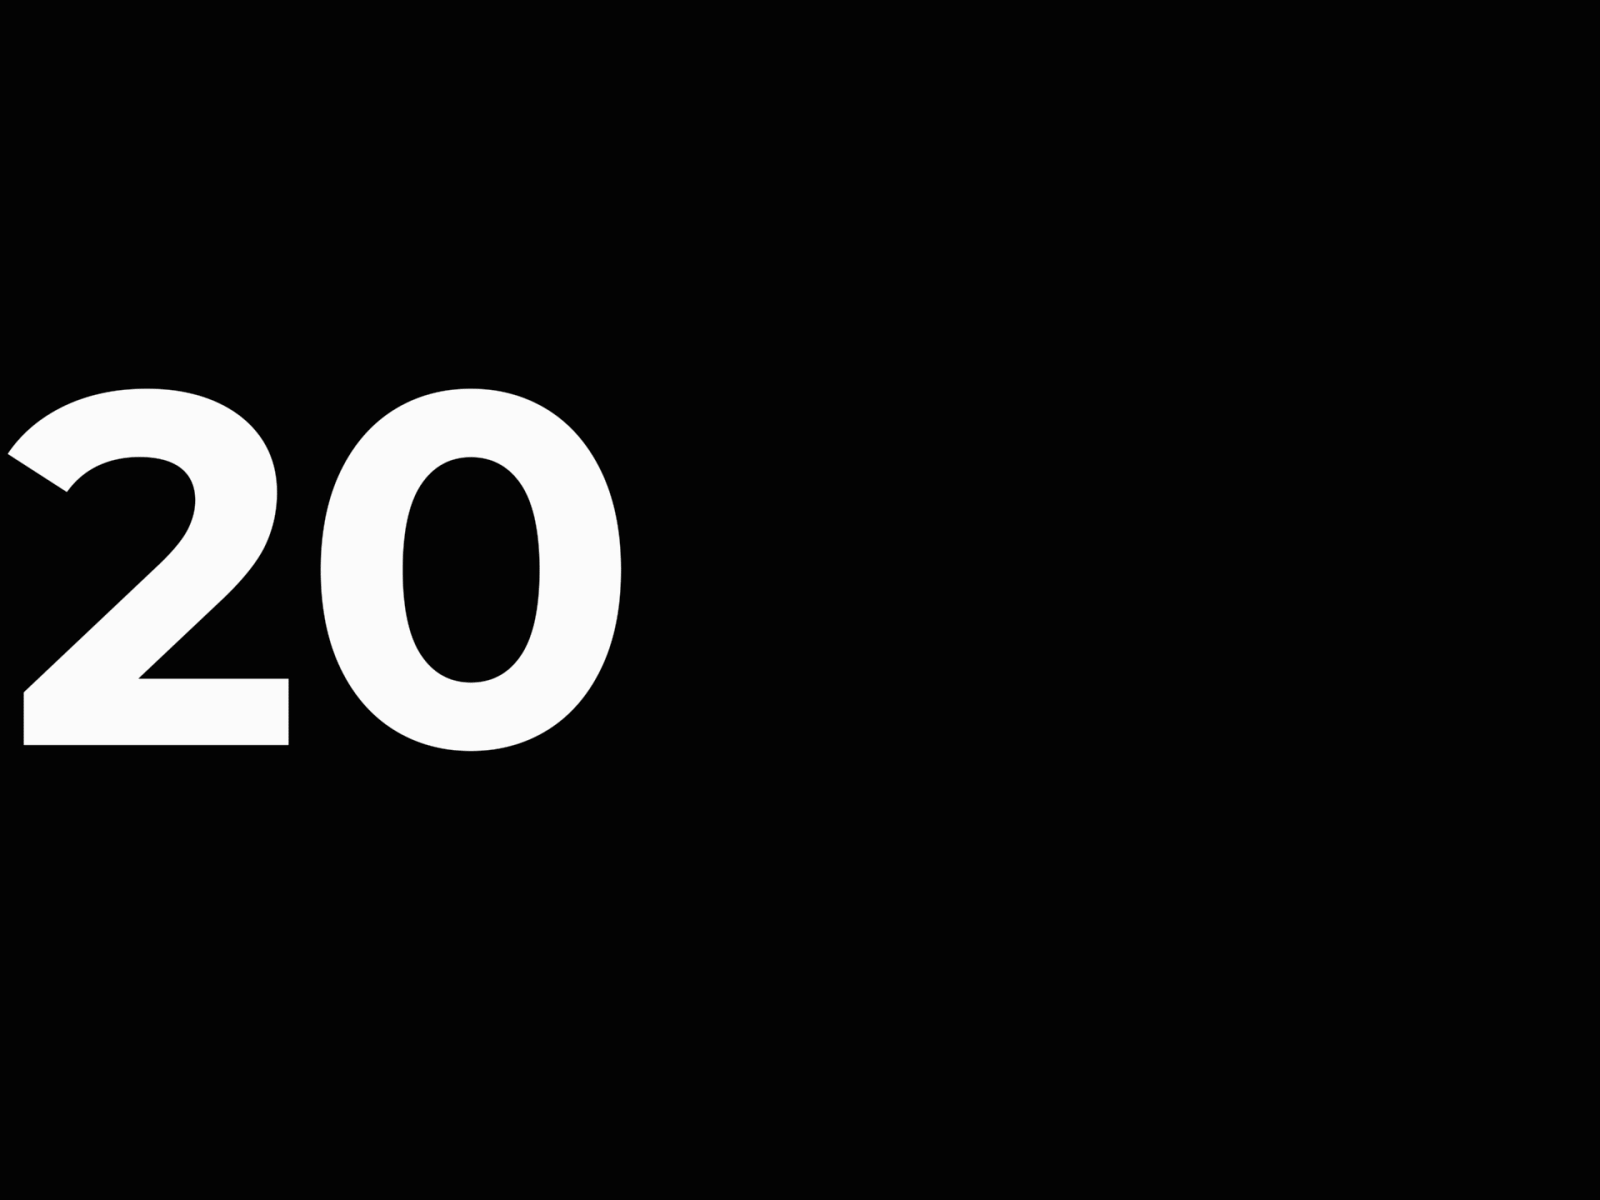 2020 by Timoffey Cosman on Dribbble